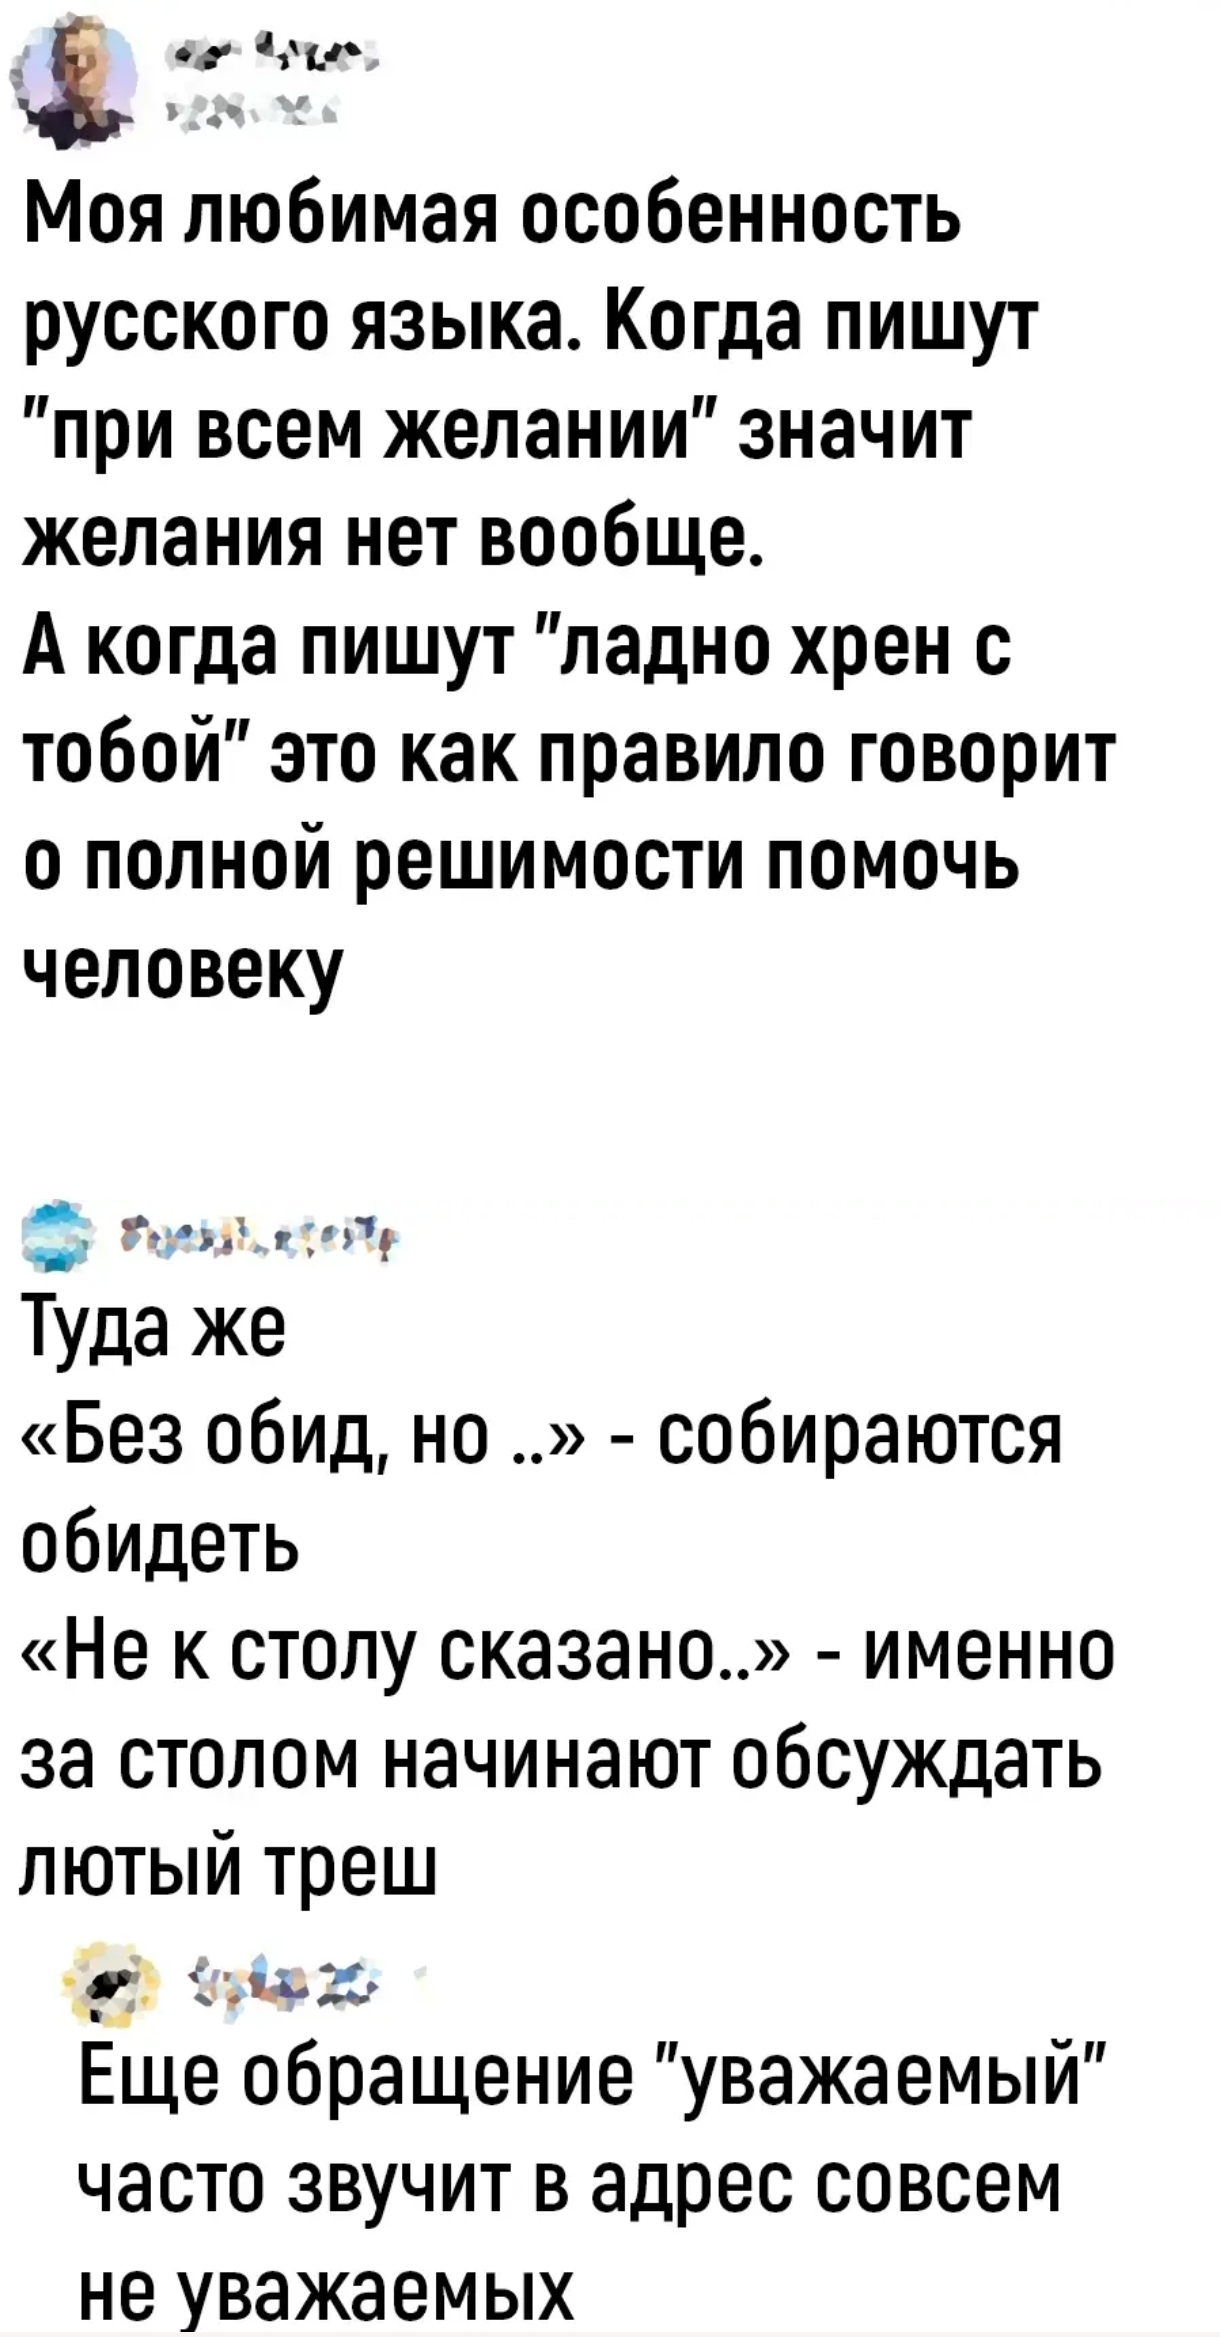 About Russian language - Russian language, Screenshot, Utterance, Quotes, Aphorism, Repeat